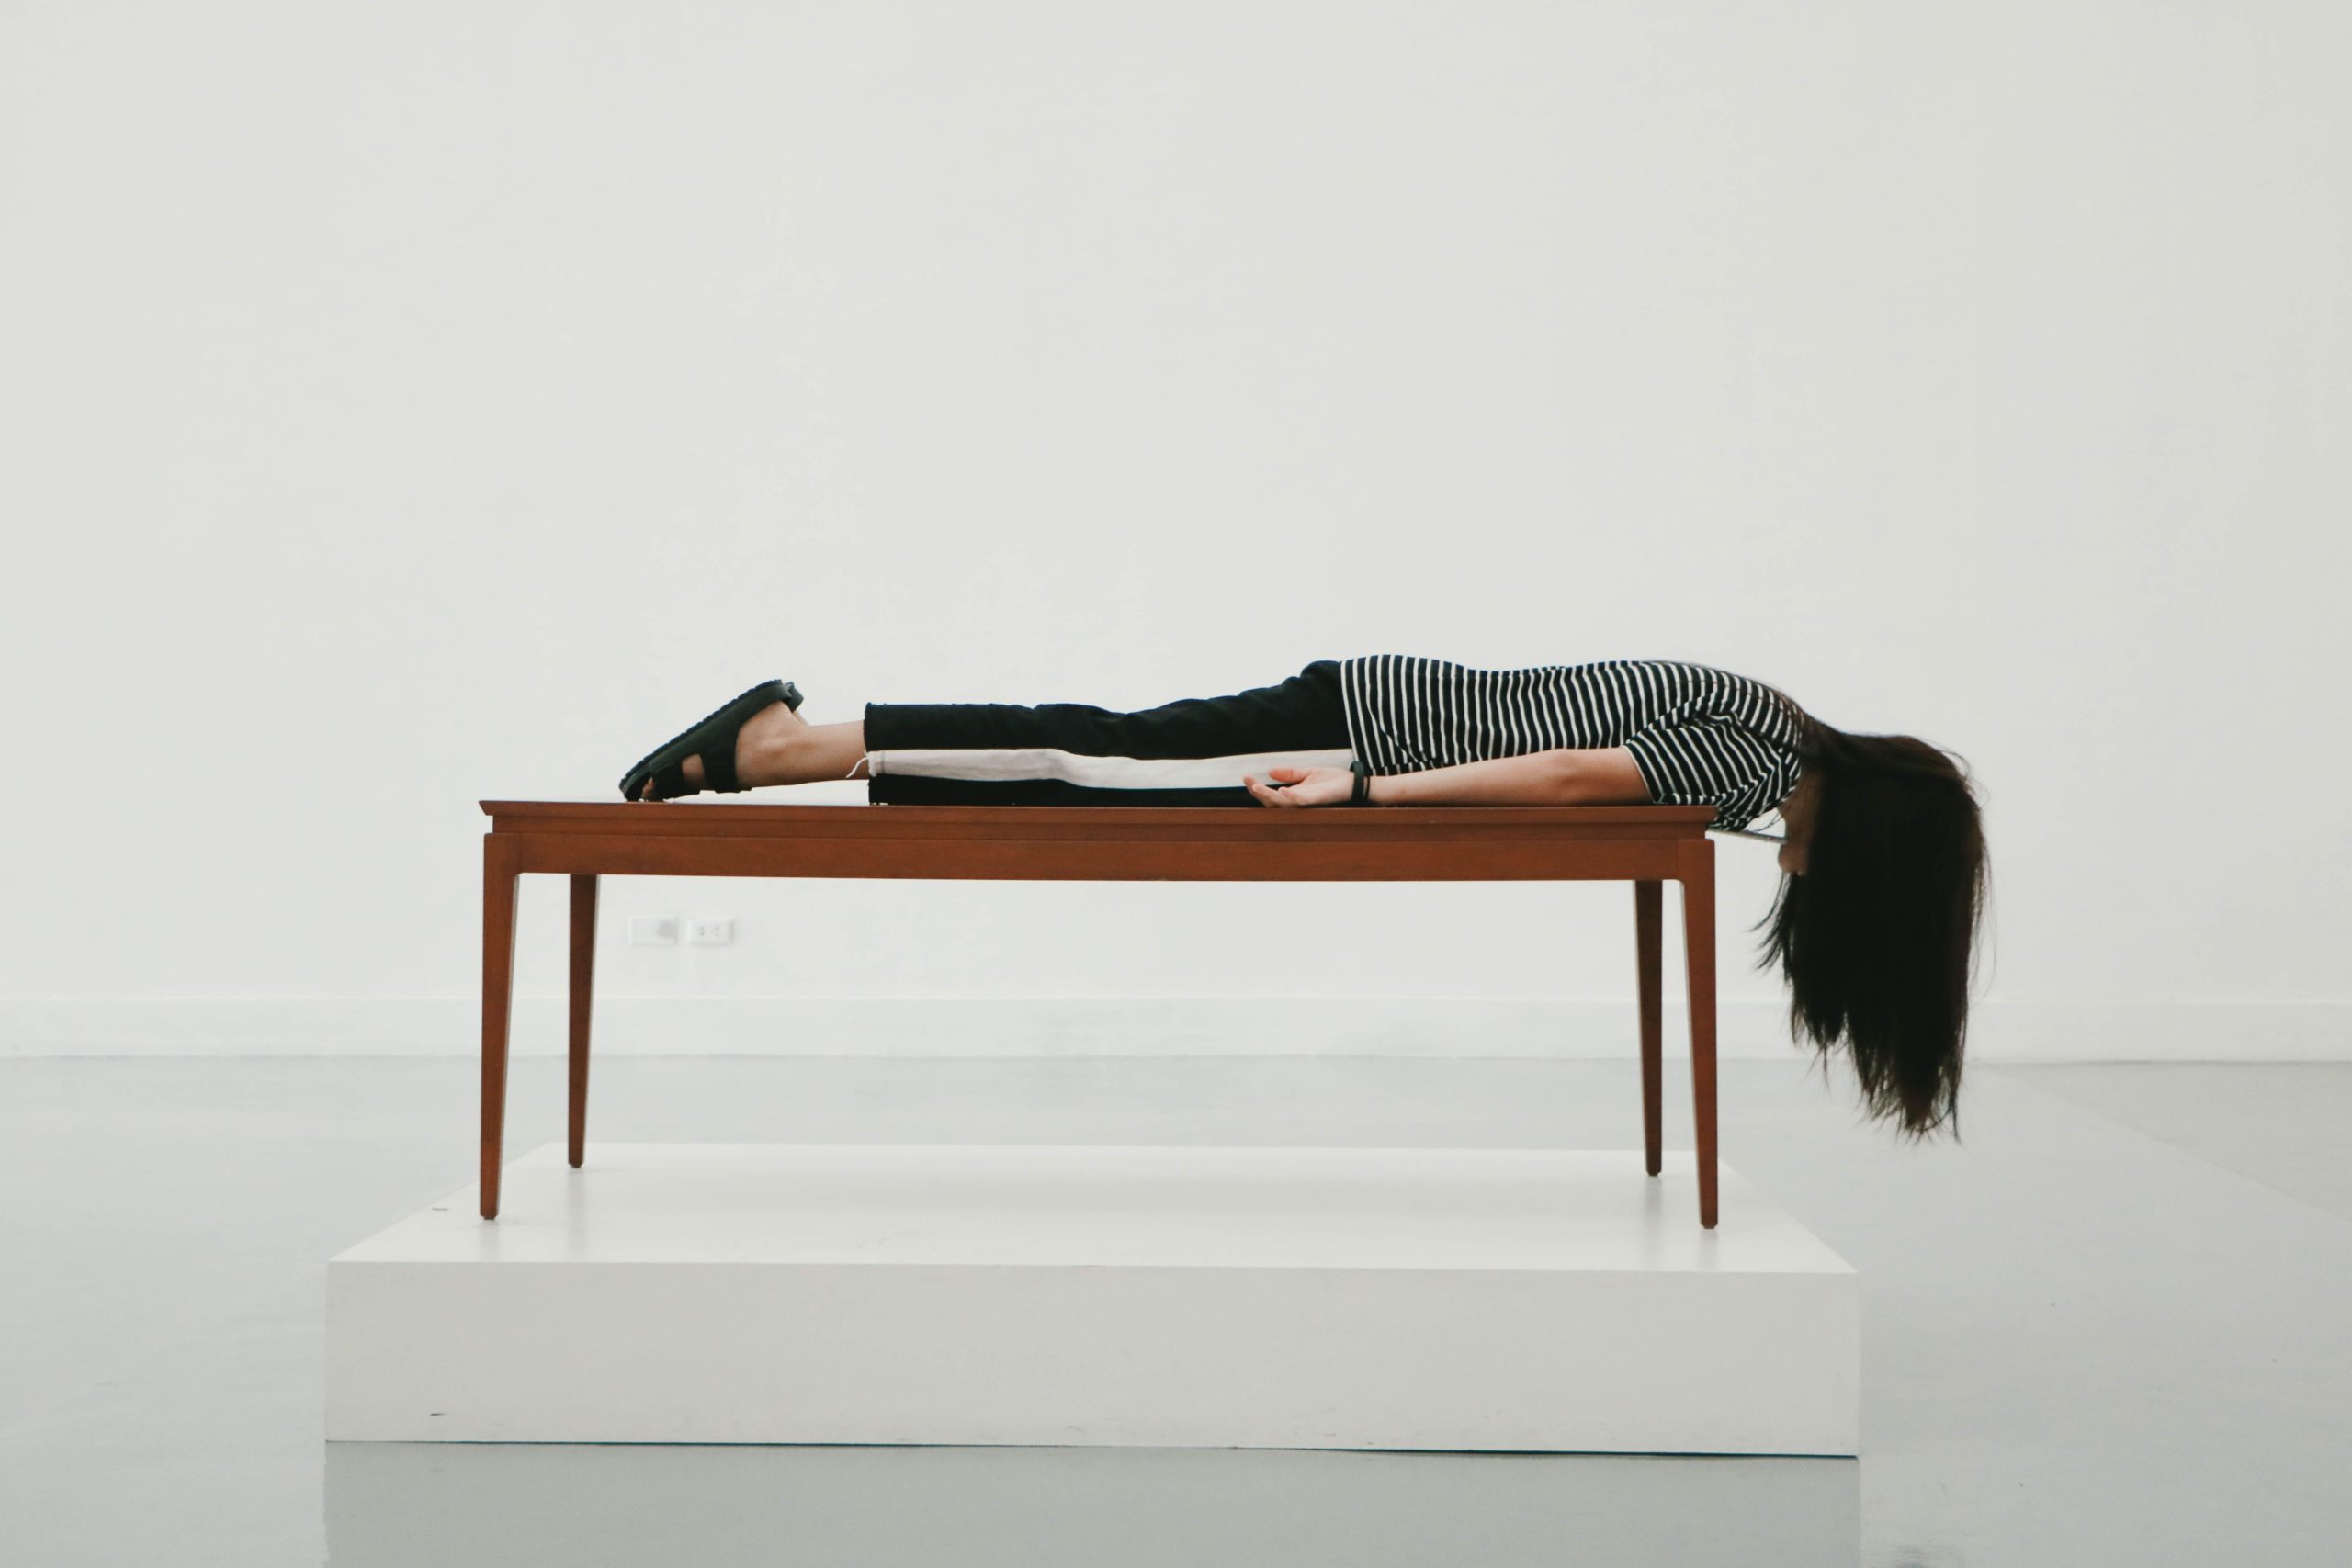 A woman lies facedown on a table to represent an exhausted student during finals week.